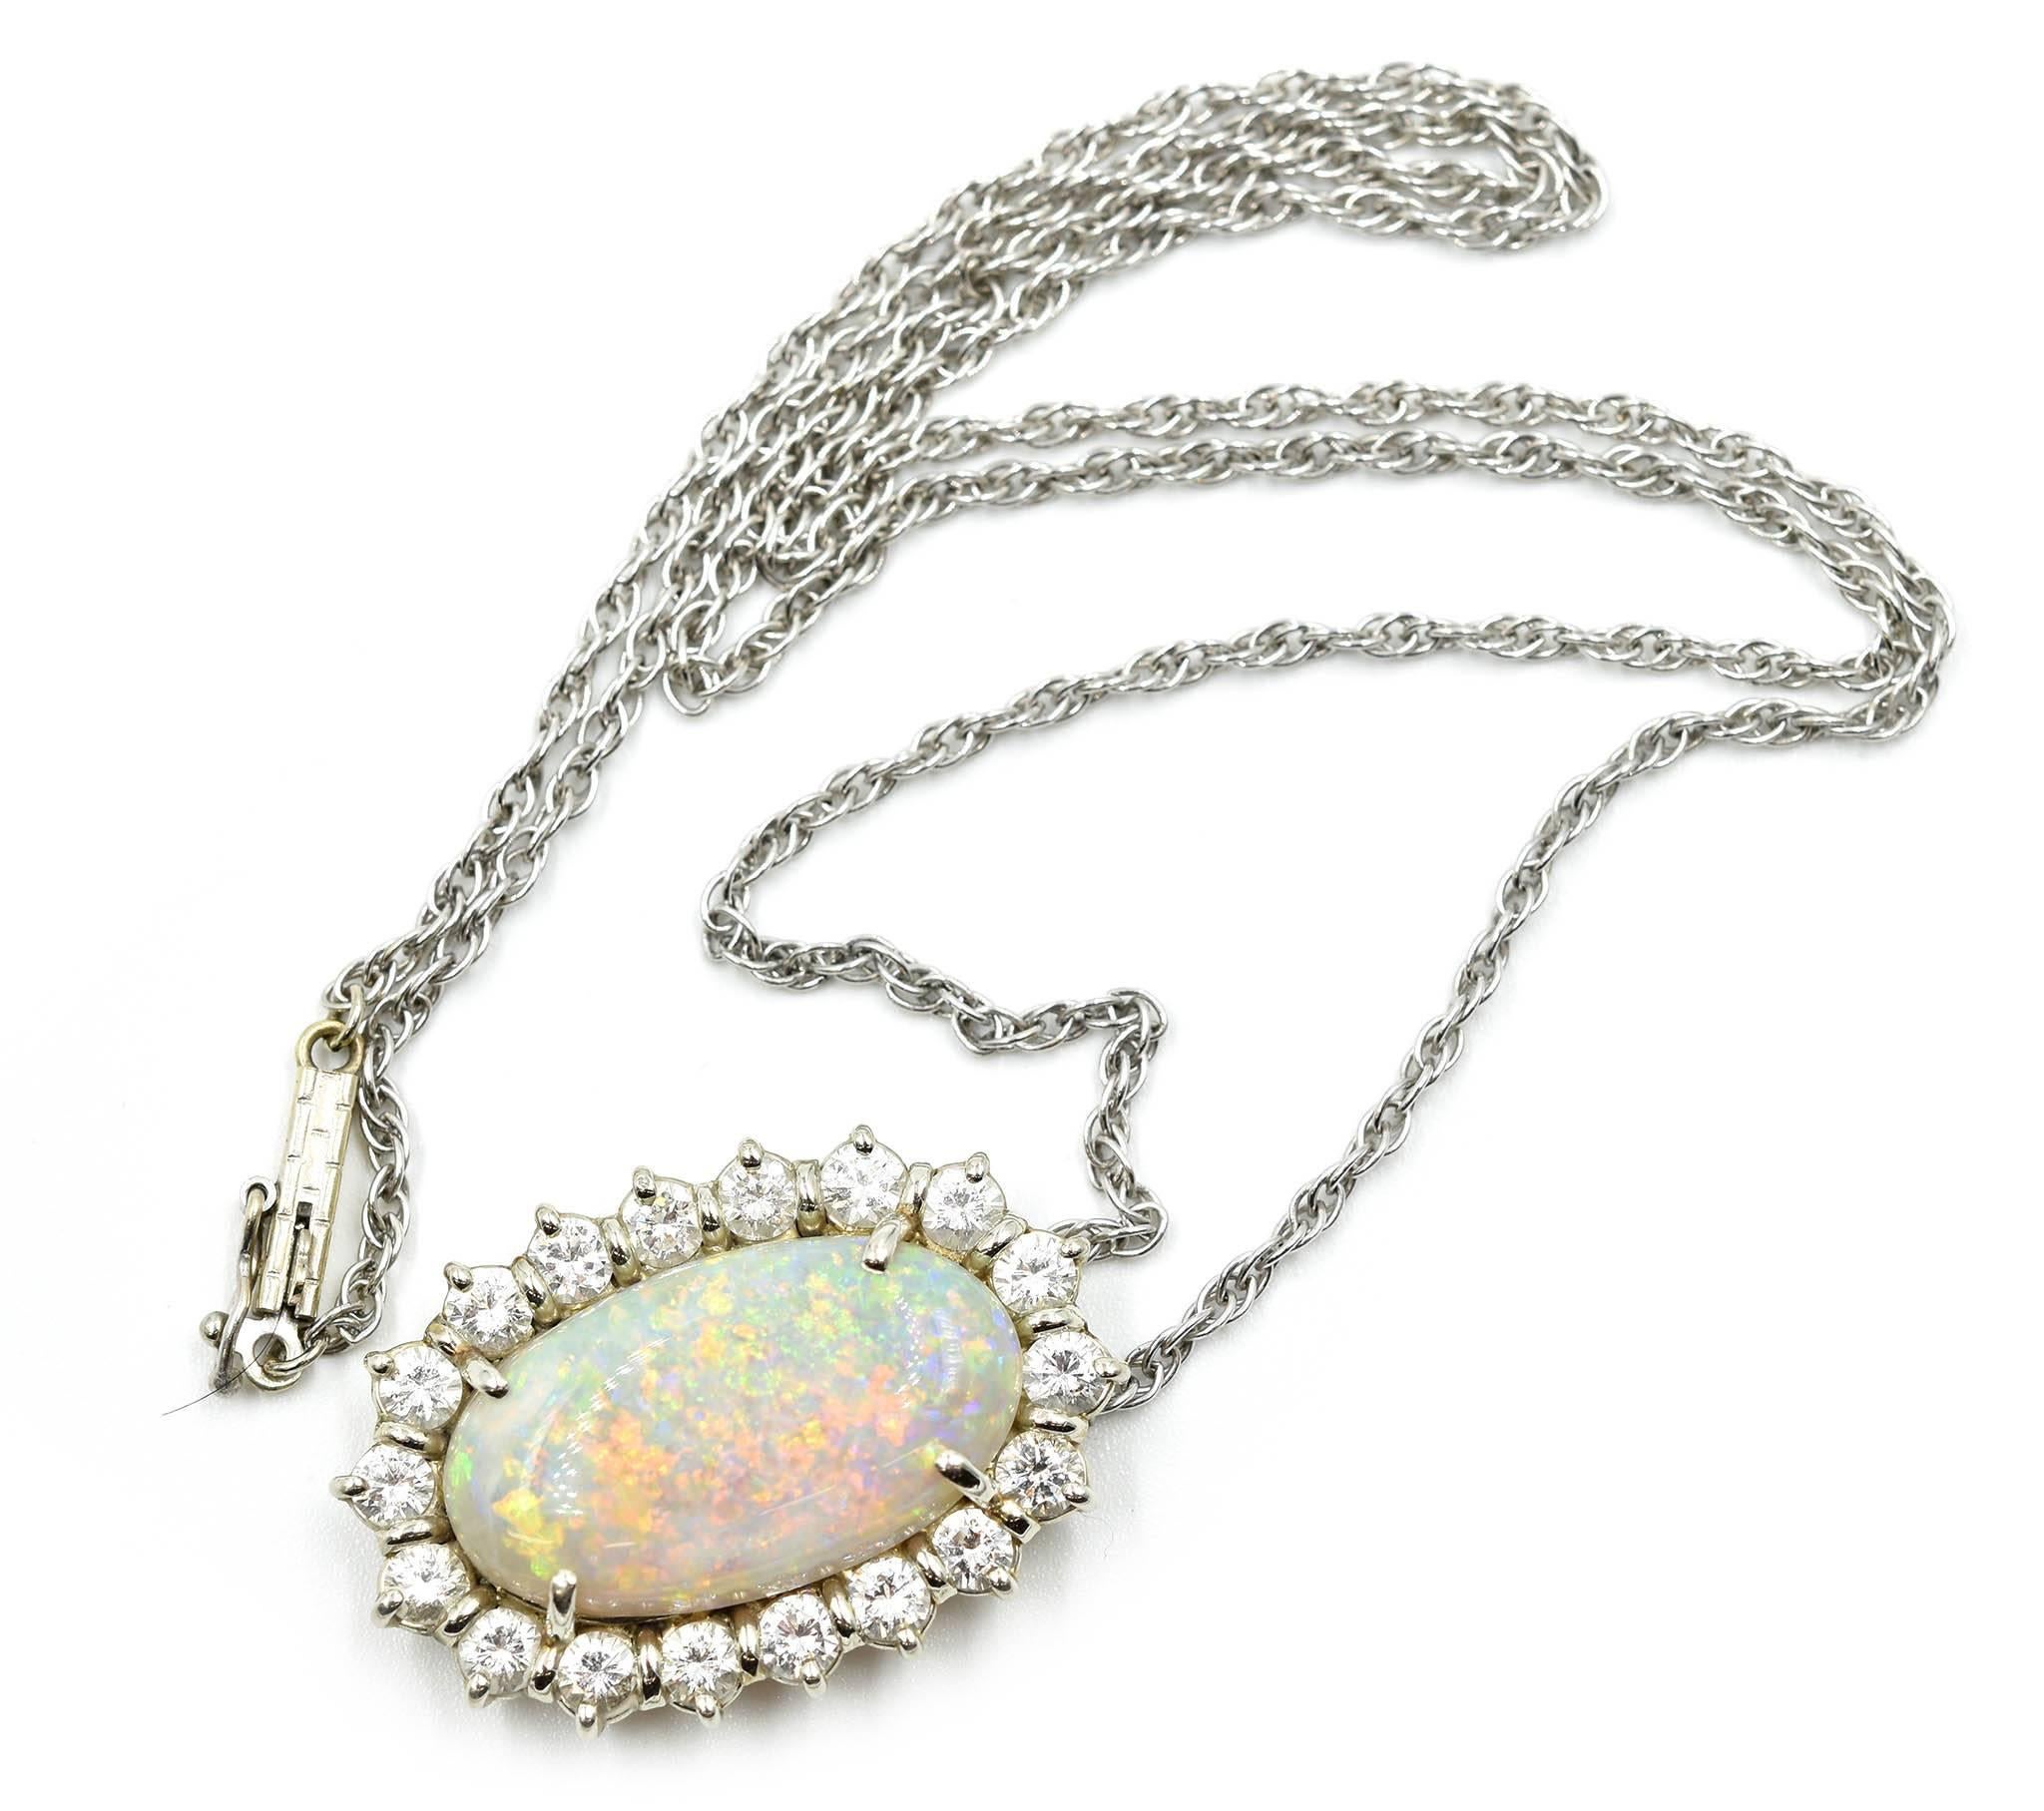 This fabulous necklace is made in solid 14k white gold, and it holds an oval-cut opal at its center. The opal measures 20.5x12.2mm. It is surrounded by a halo of round diamonds for a total weight of 1.80ct. The diamonds are graded G-H in color and